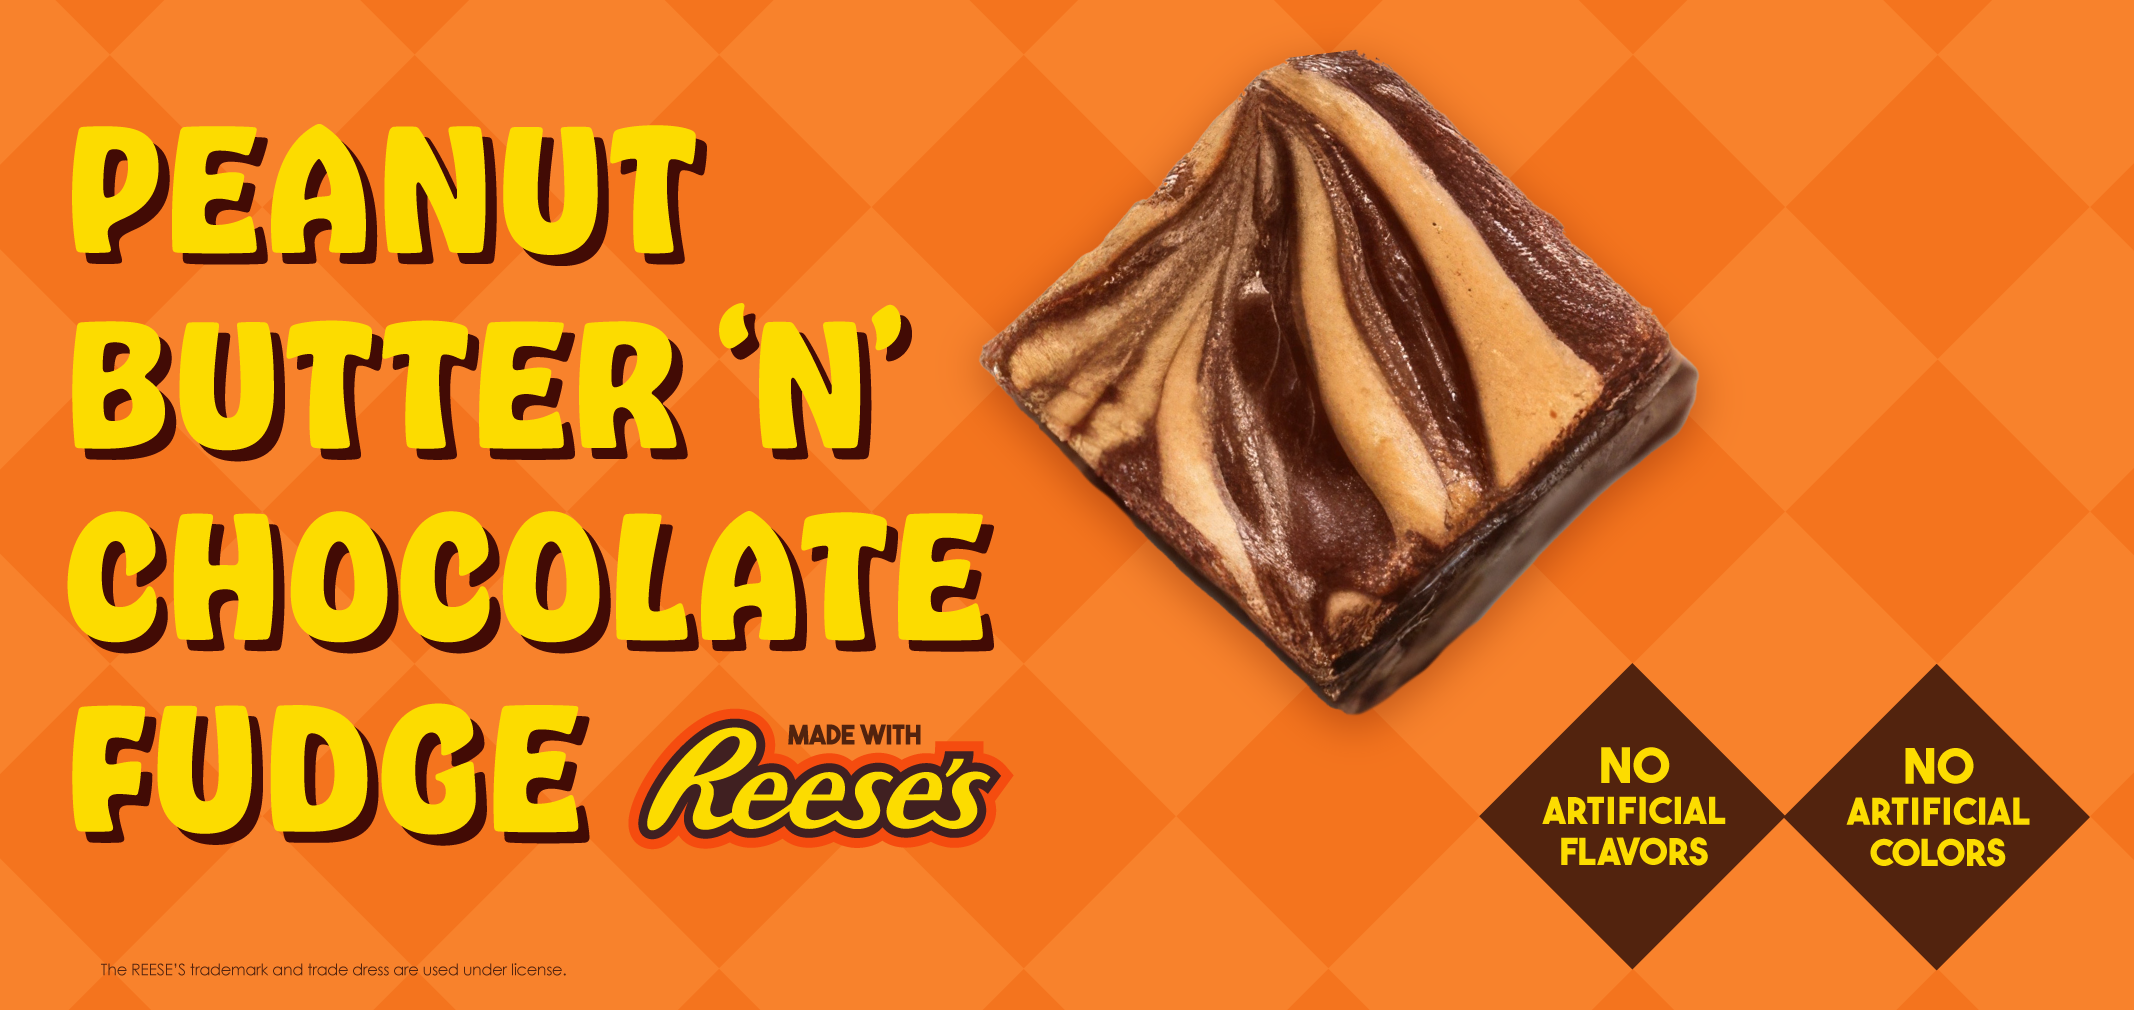 Peanut Butter 'n' Chocolate Fudge made with Reese's Peanut Butter label image